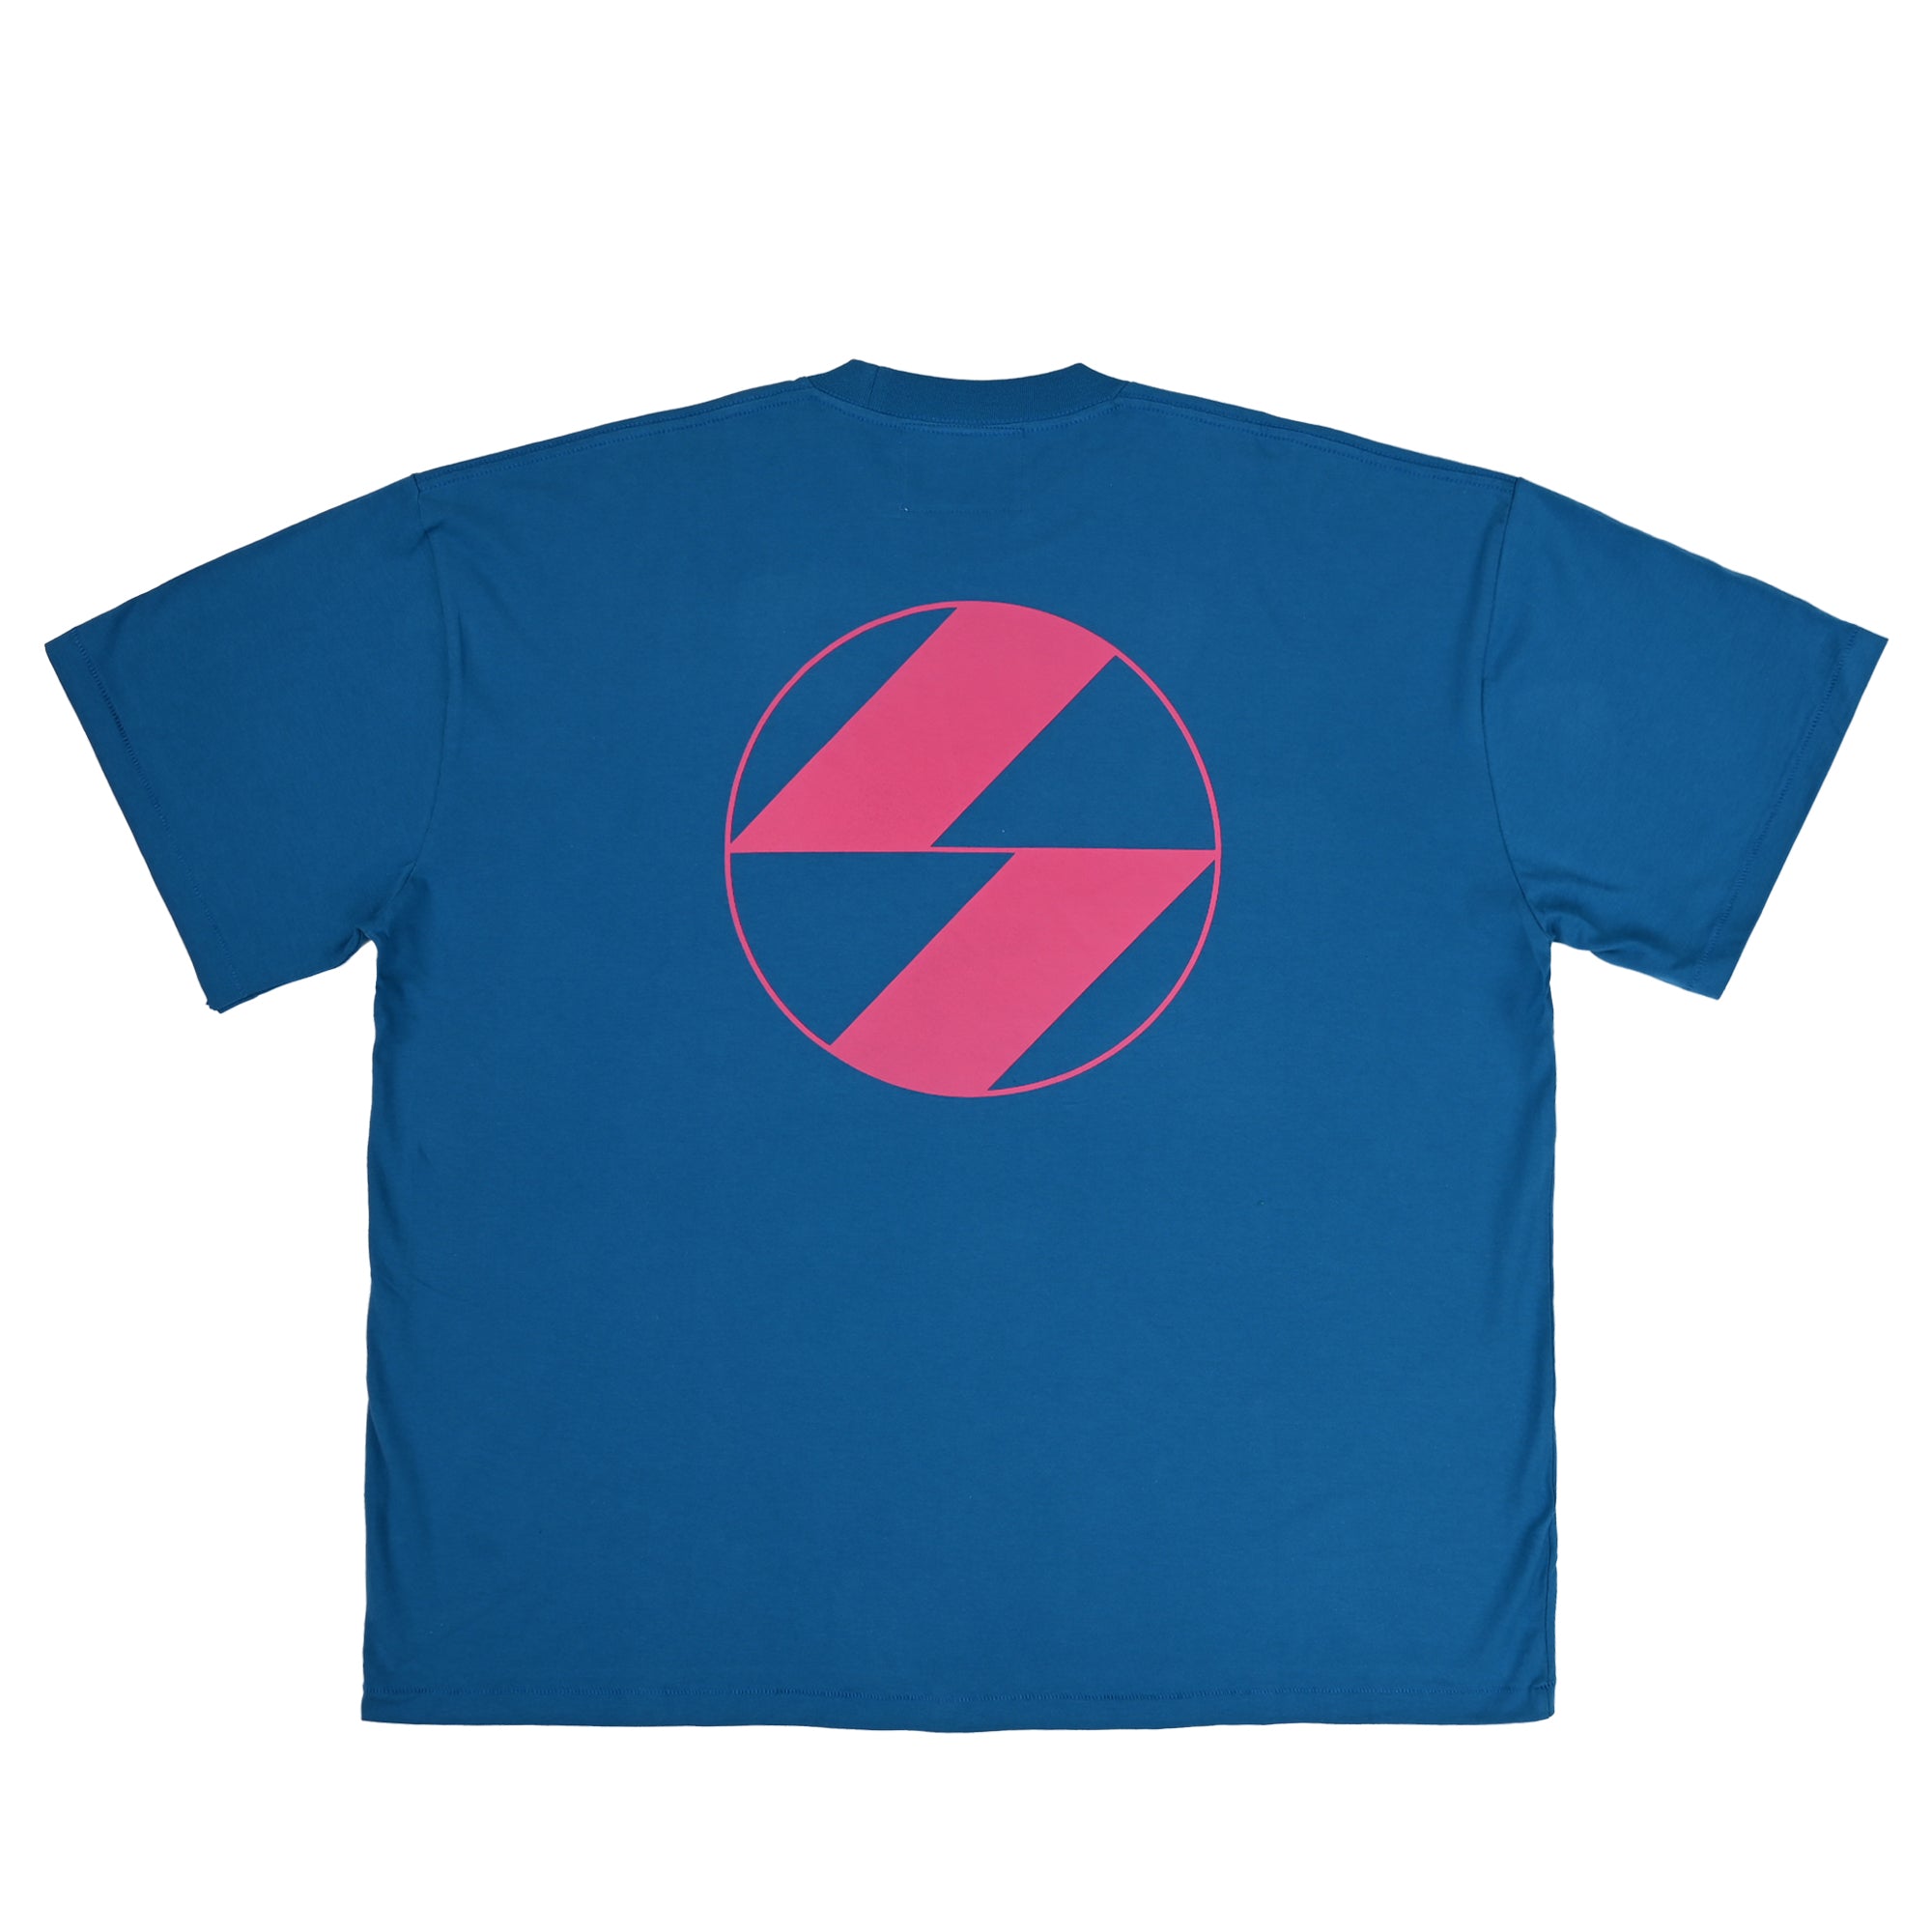 The Salvages 'Sublime' Classic Emblem OS T-Shirt in Deep Blue